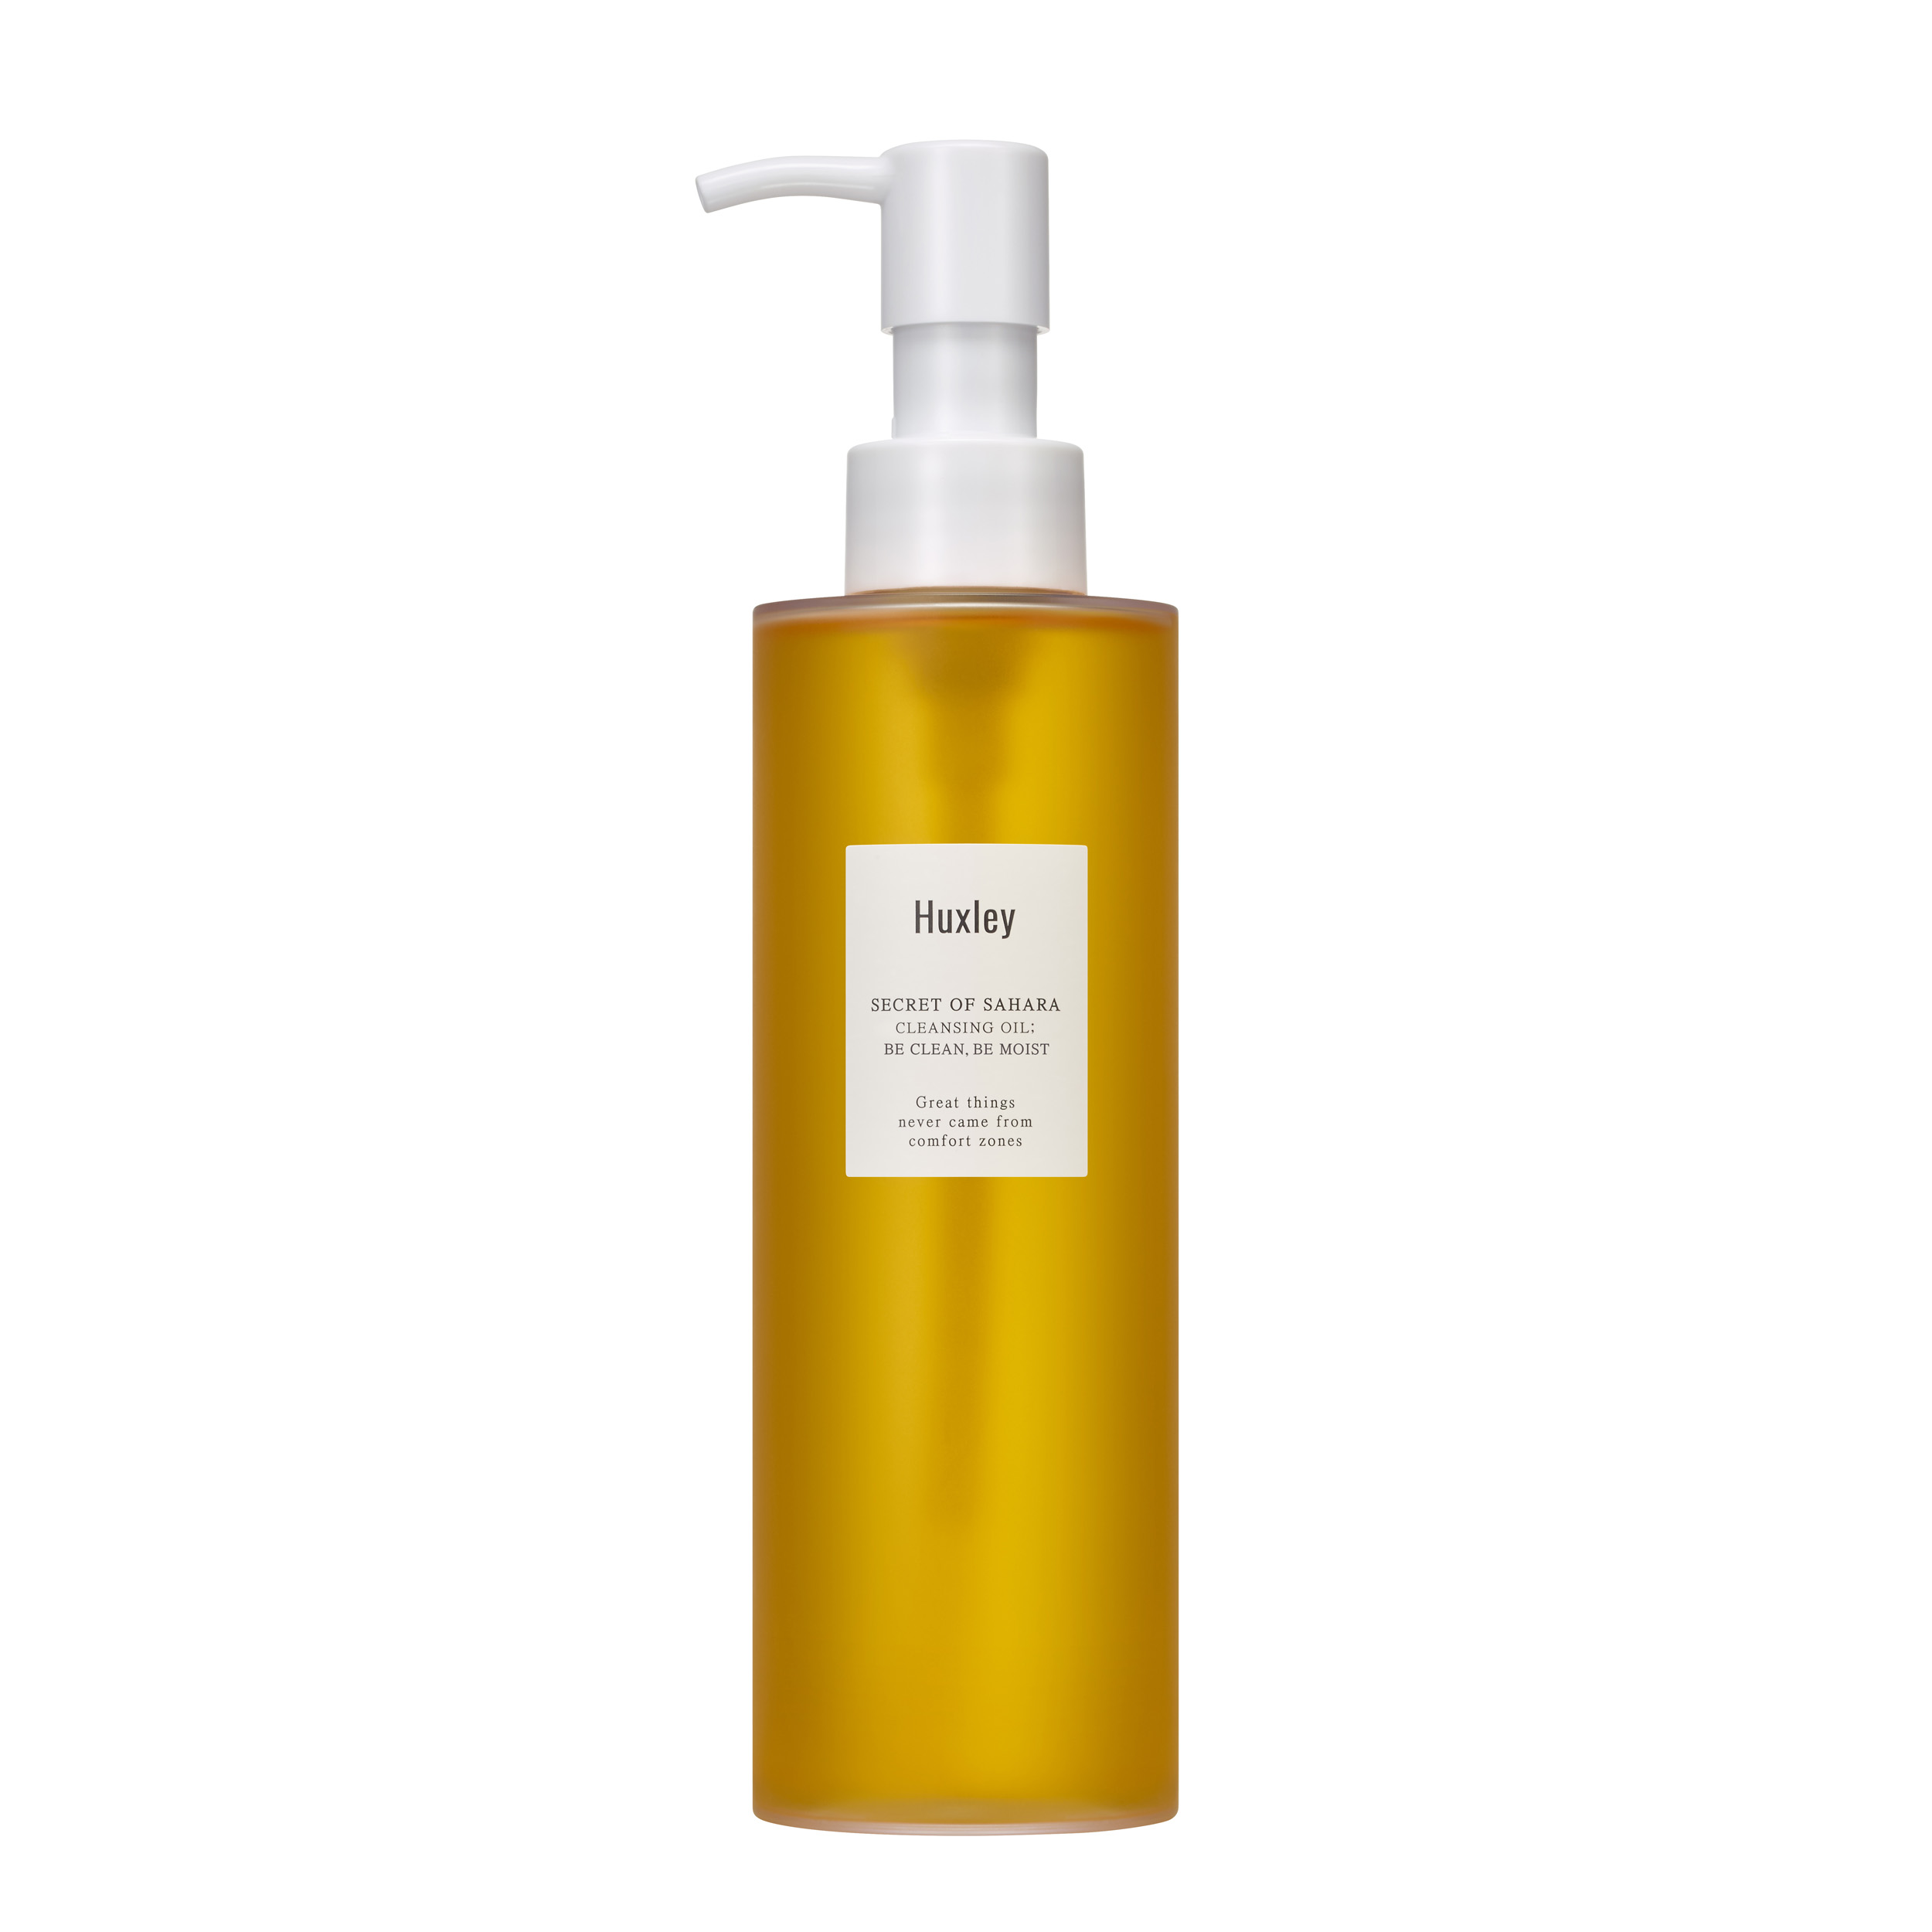 Huxley Cleansing Oil Be Clean Be Moist 200 ml